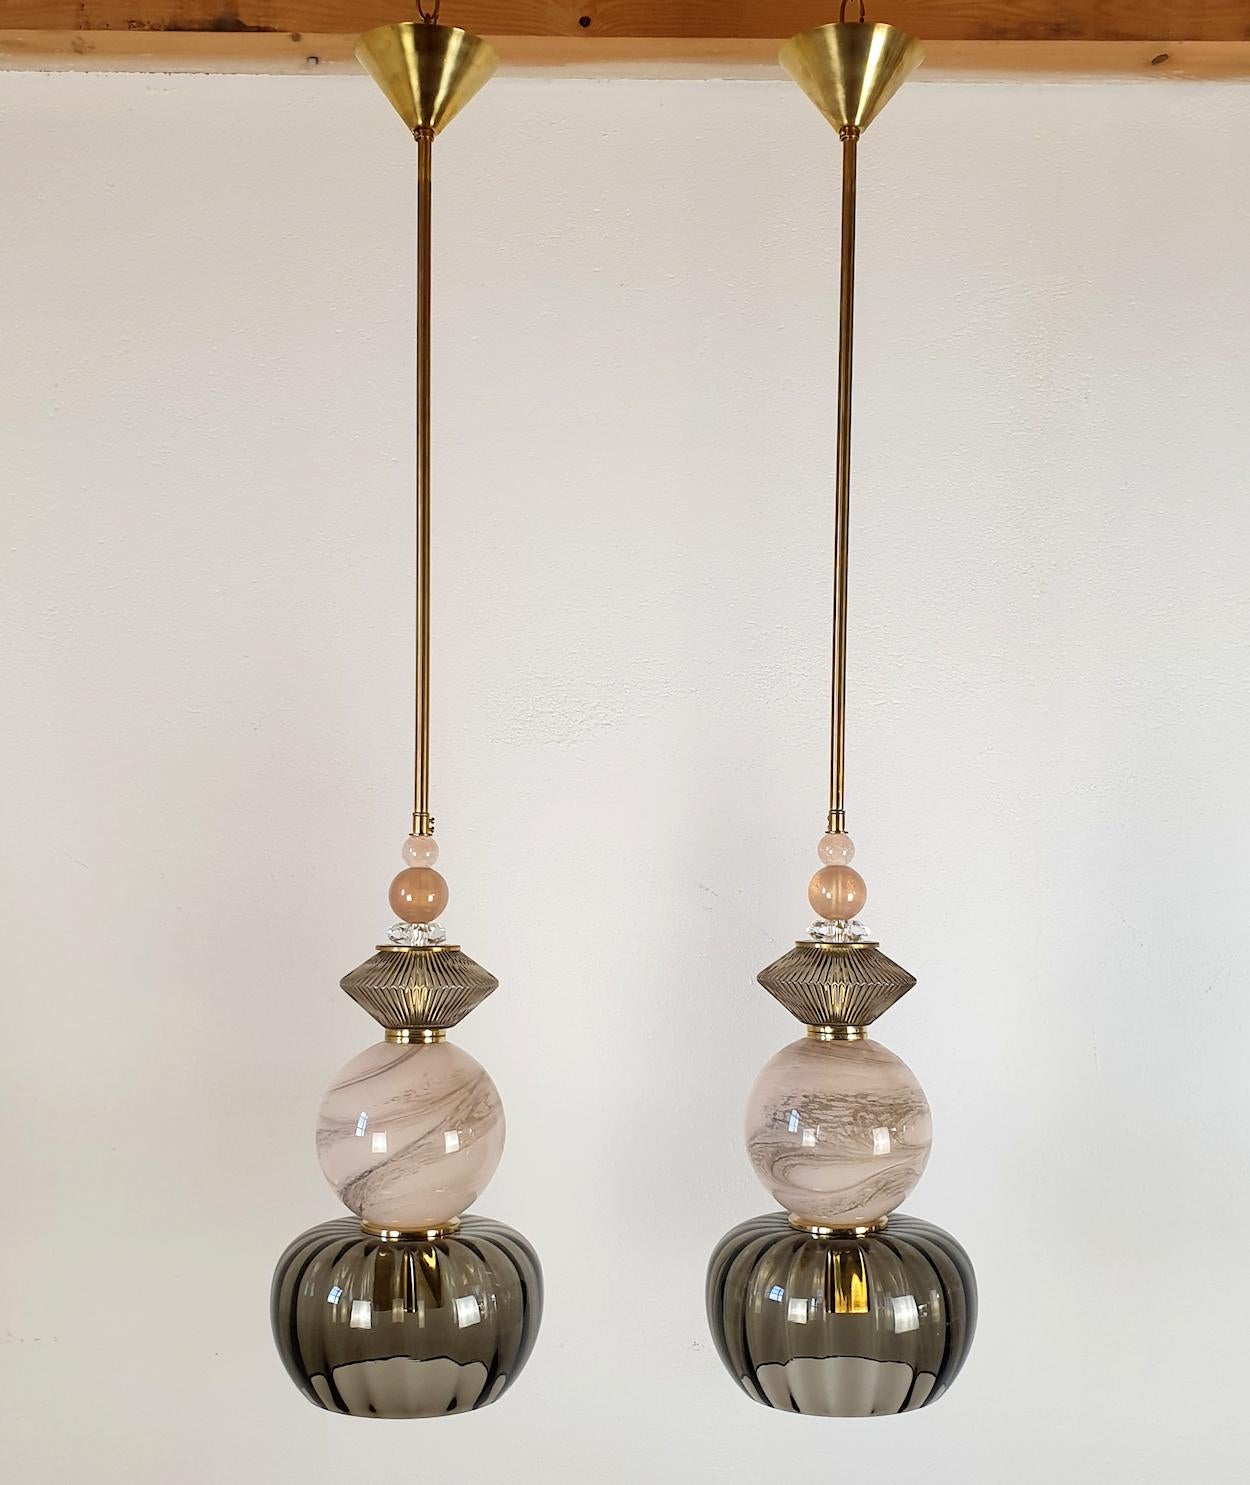 Pair of Murano glass and brass pendant ceiling lights, Italy 2000s.
Their quality and style make them look like pieces of jewelry.
The pair has a Mid-Century Modern style and is very trendy.
The pendants are made of a central soft pink translucent,